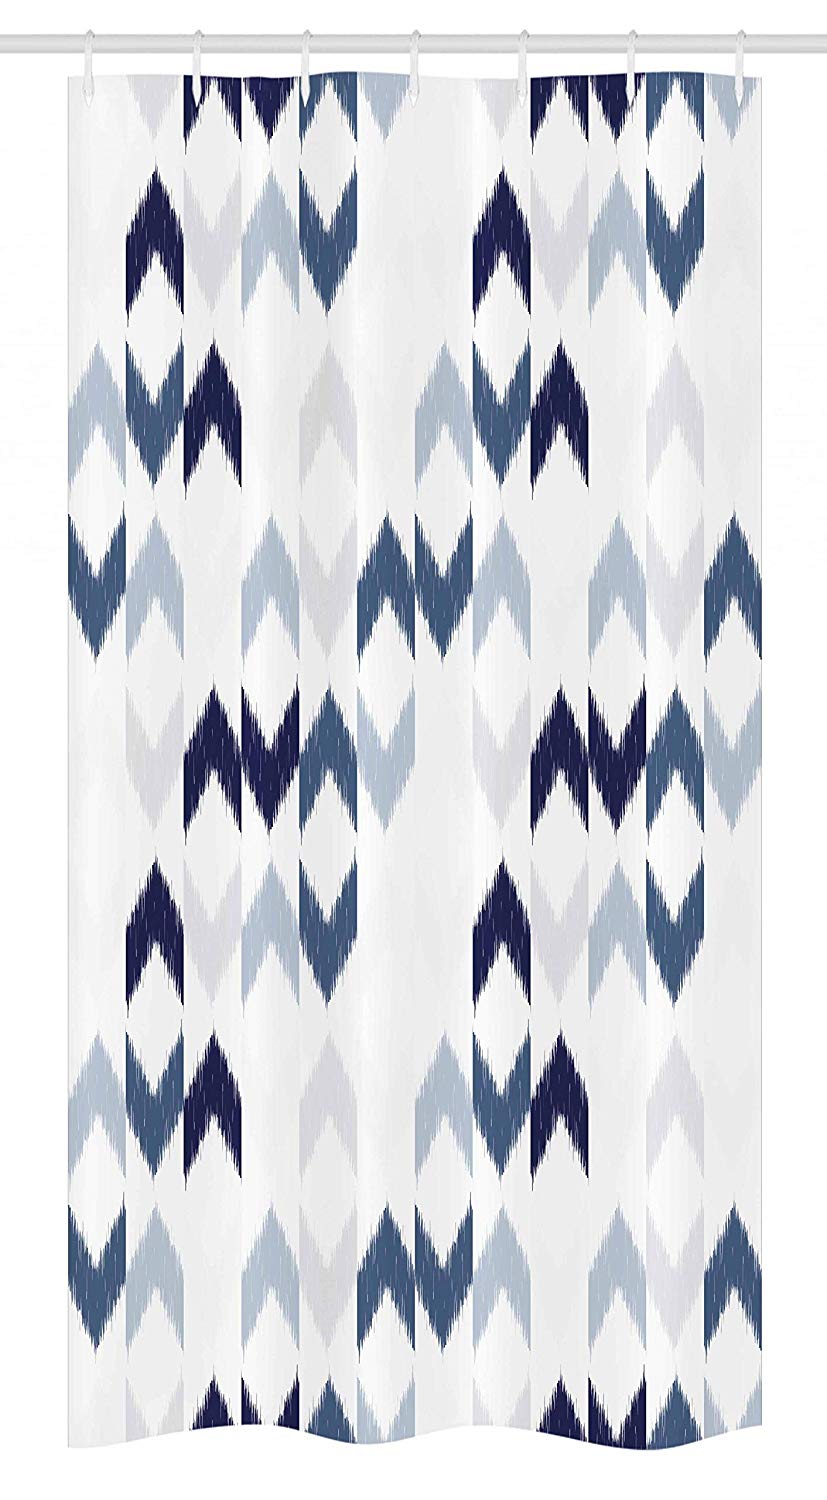 Ambesonne Navy Stall Shower Curtain, Abstract Ikat Chevron with Hazy Zigzag Folk Traditional Image, Fabric Bathroom Decor Set with Hooks, 36" X 72", Blue Purple